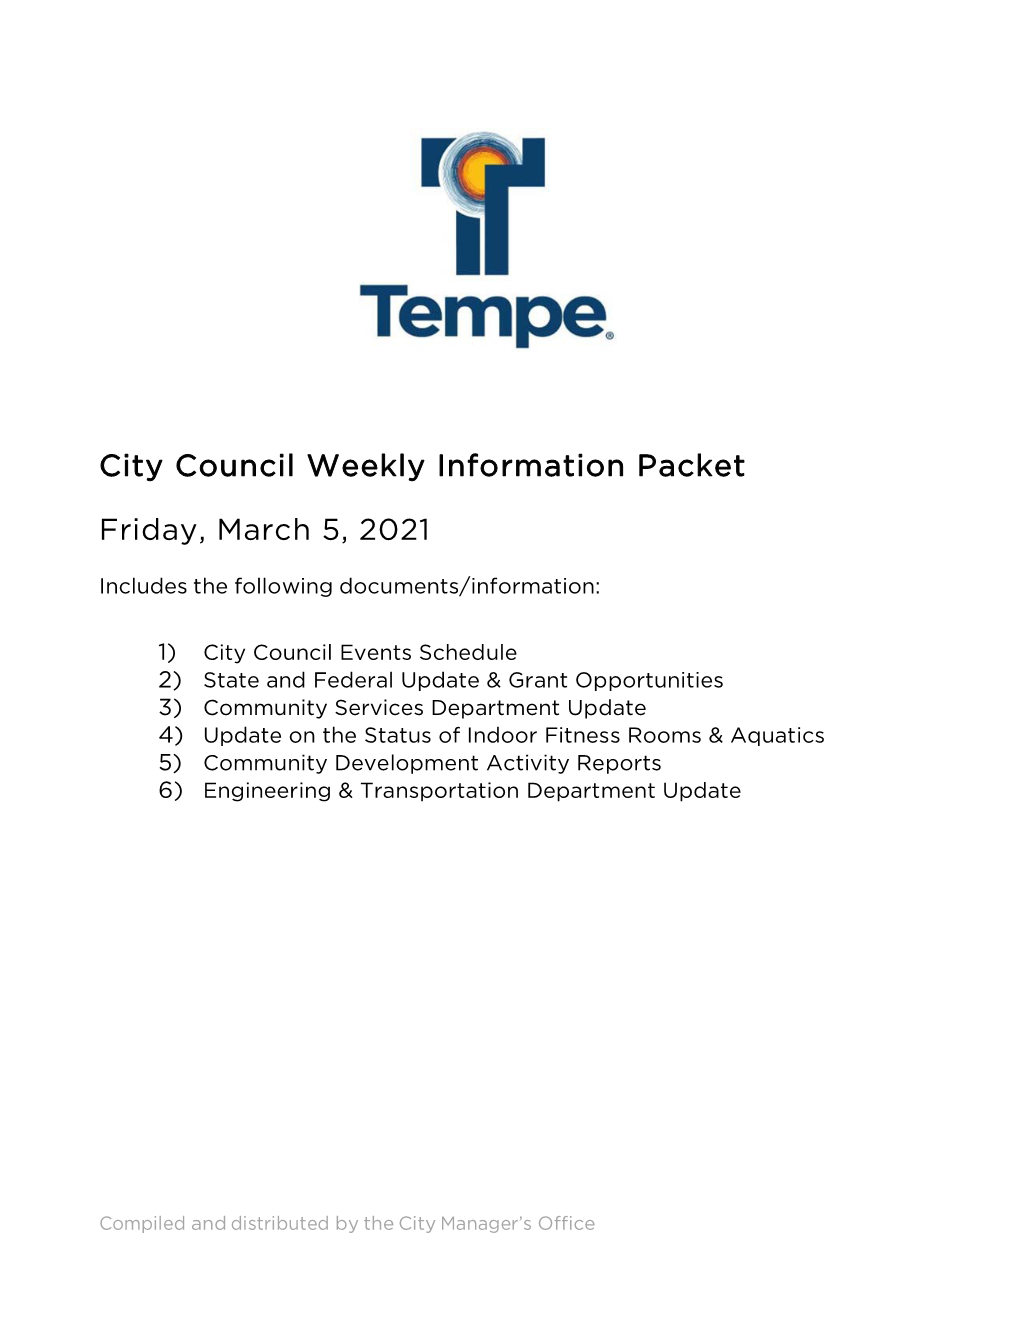 City Council Weekly Information Packet Friday